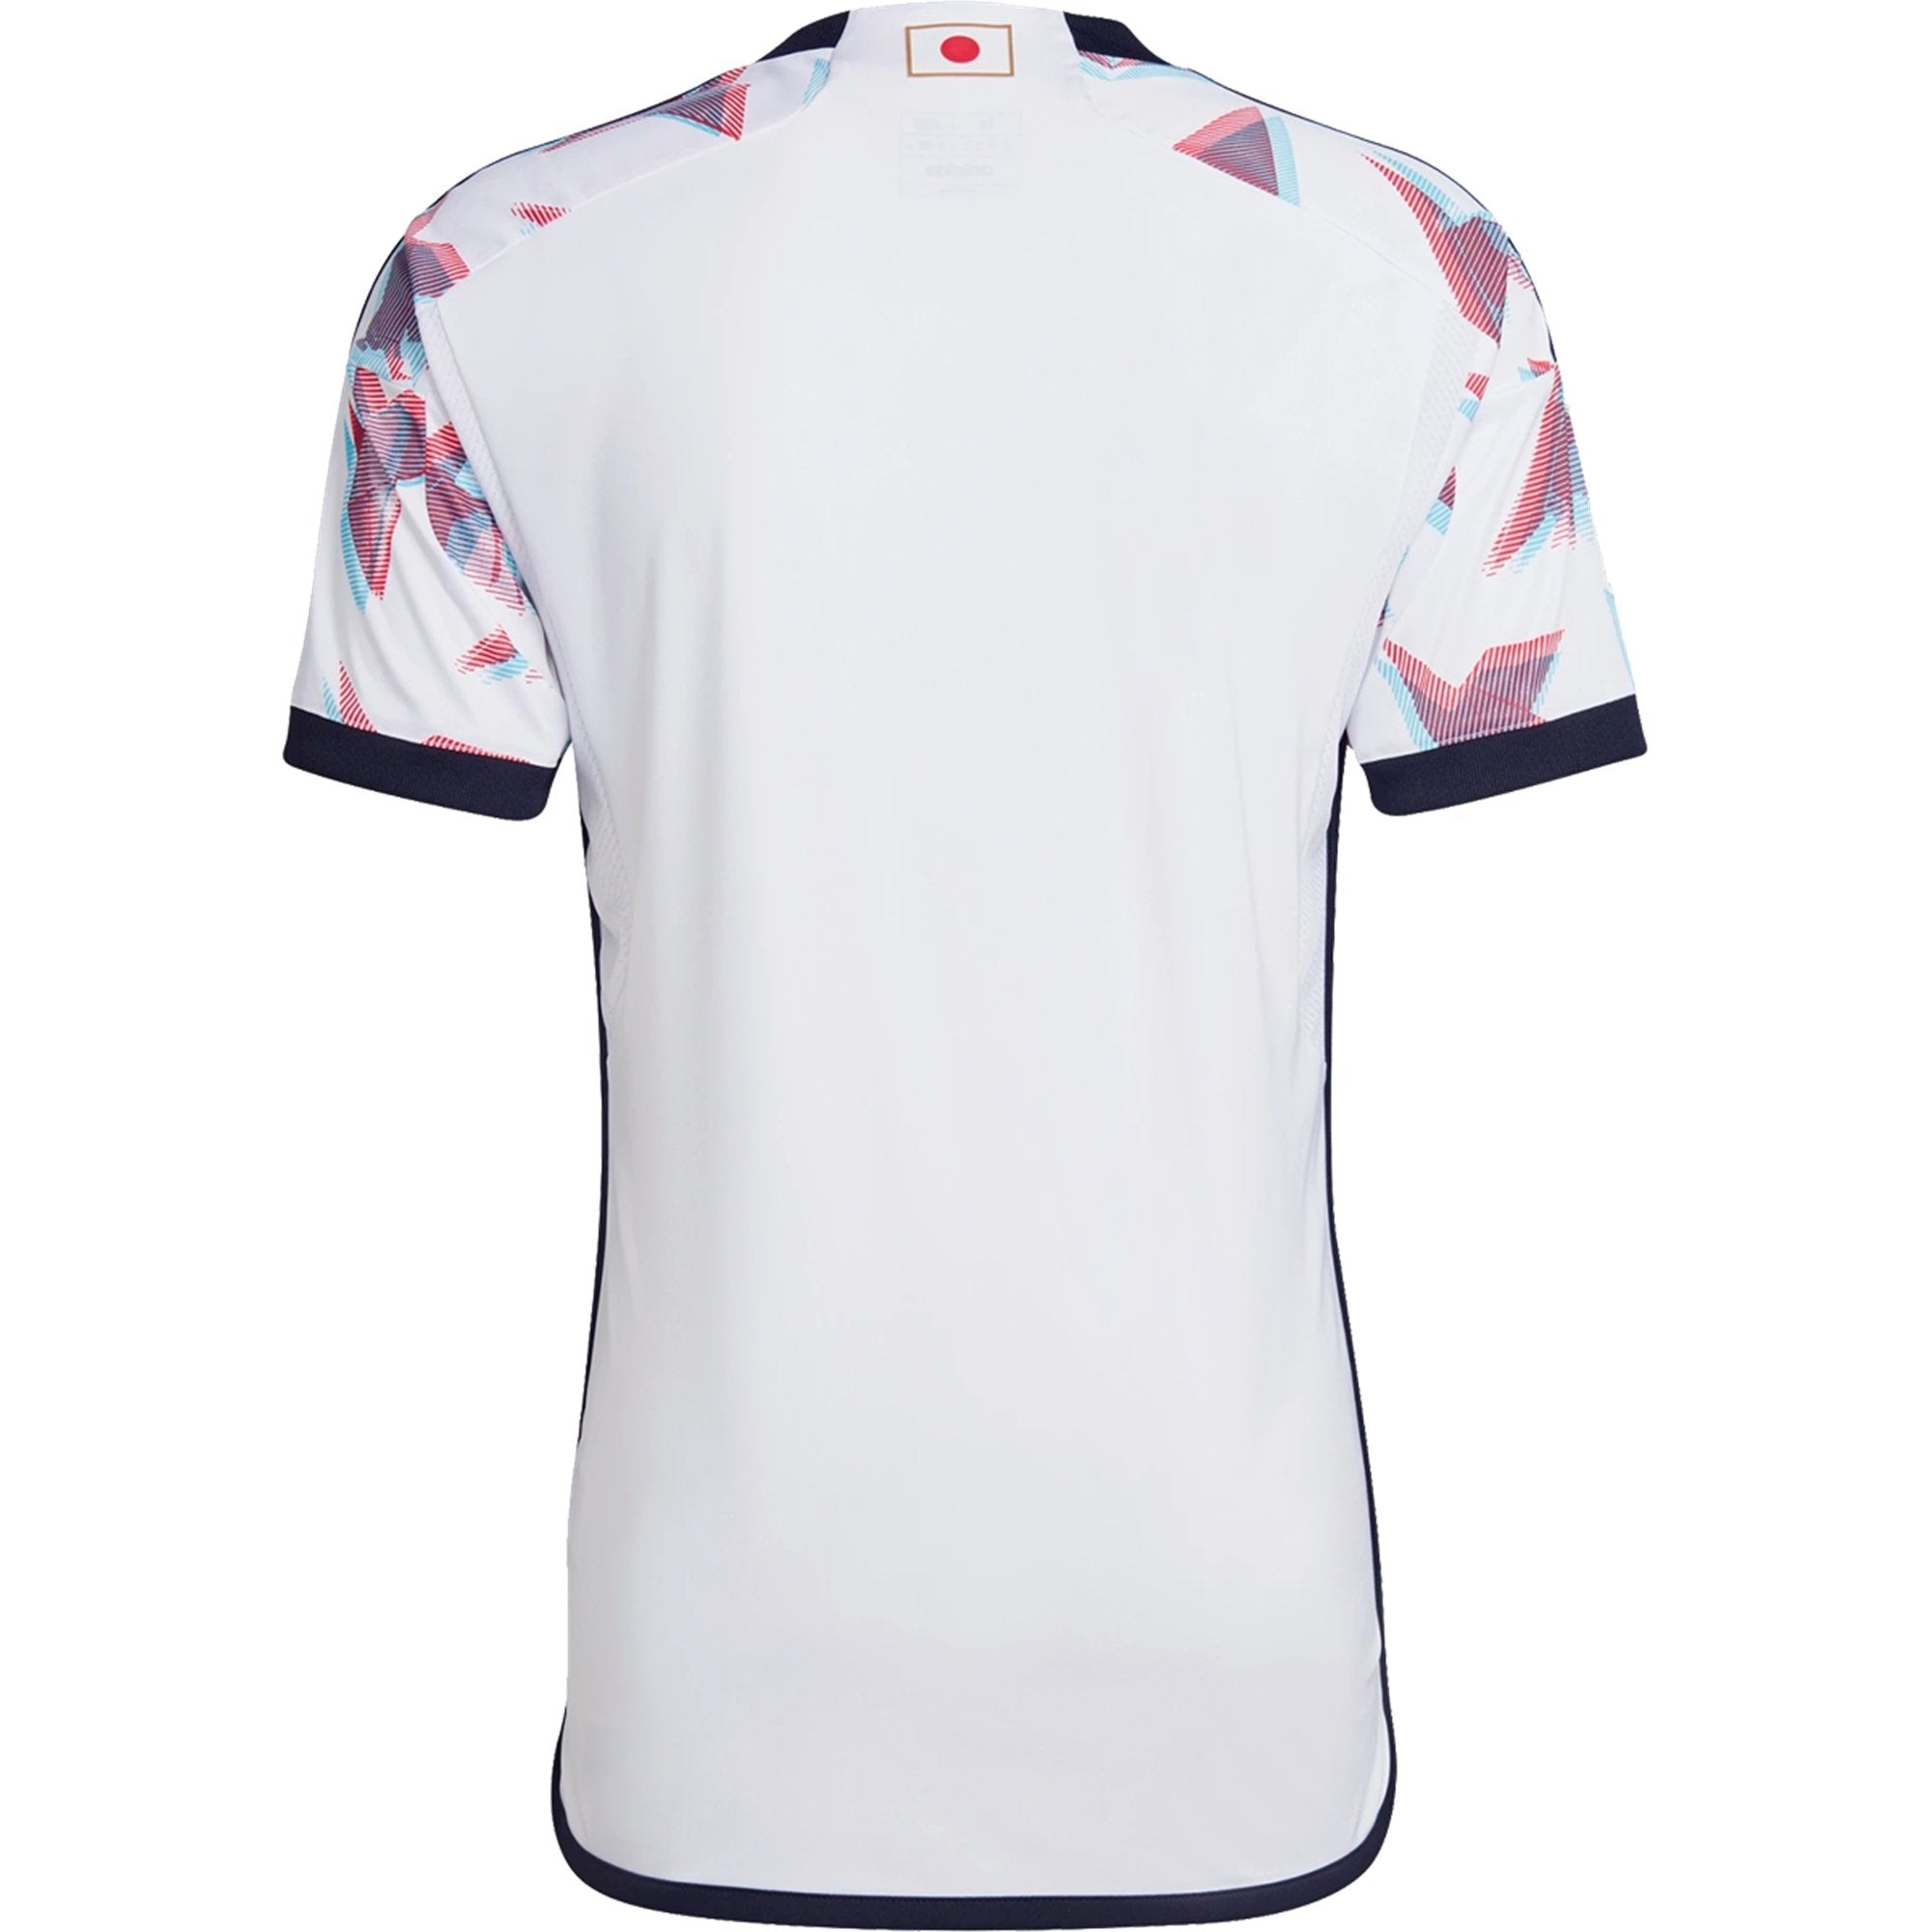 Japan Special Jersey 2022